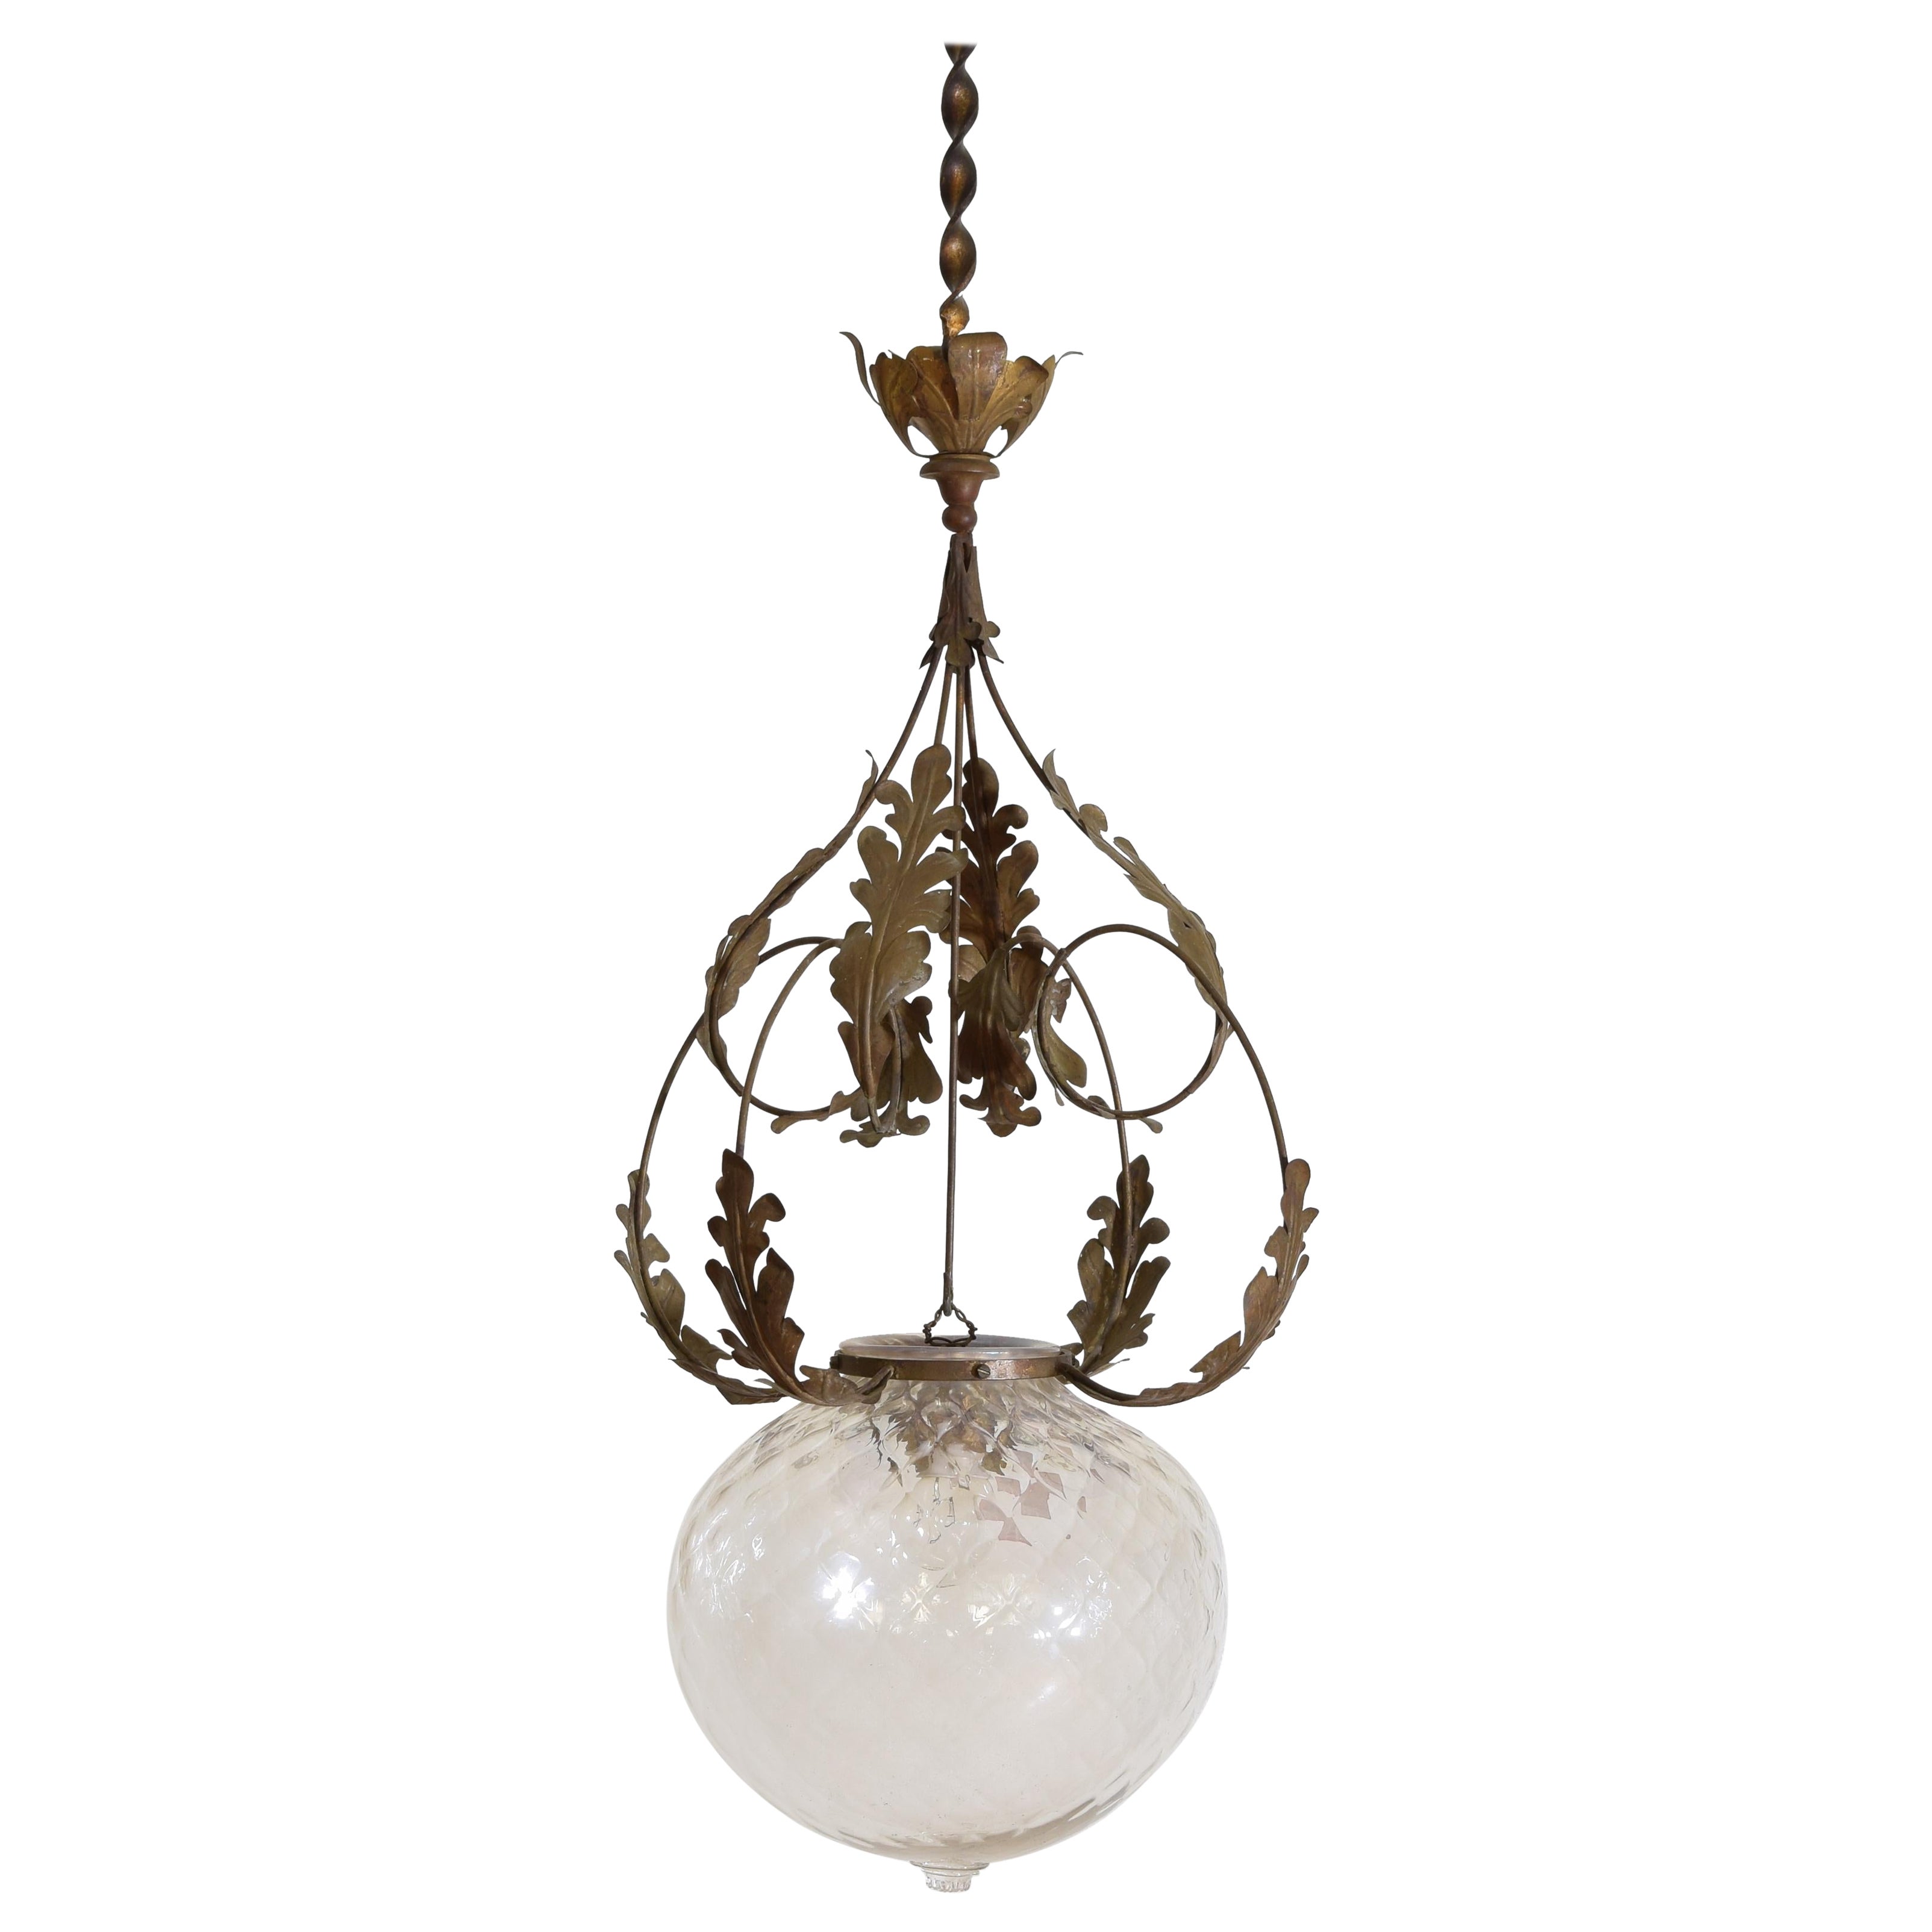 Italian, Venice, Blown Glass and Gilt Metal Lantern in the Baroque Style